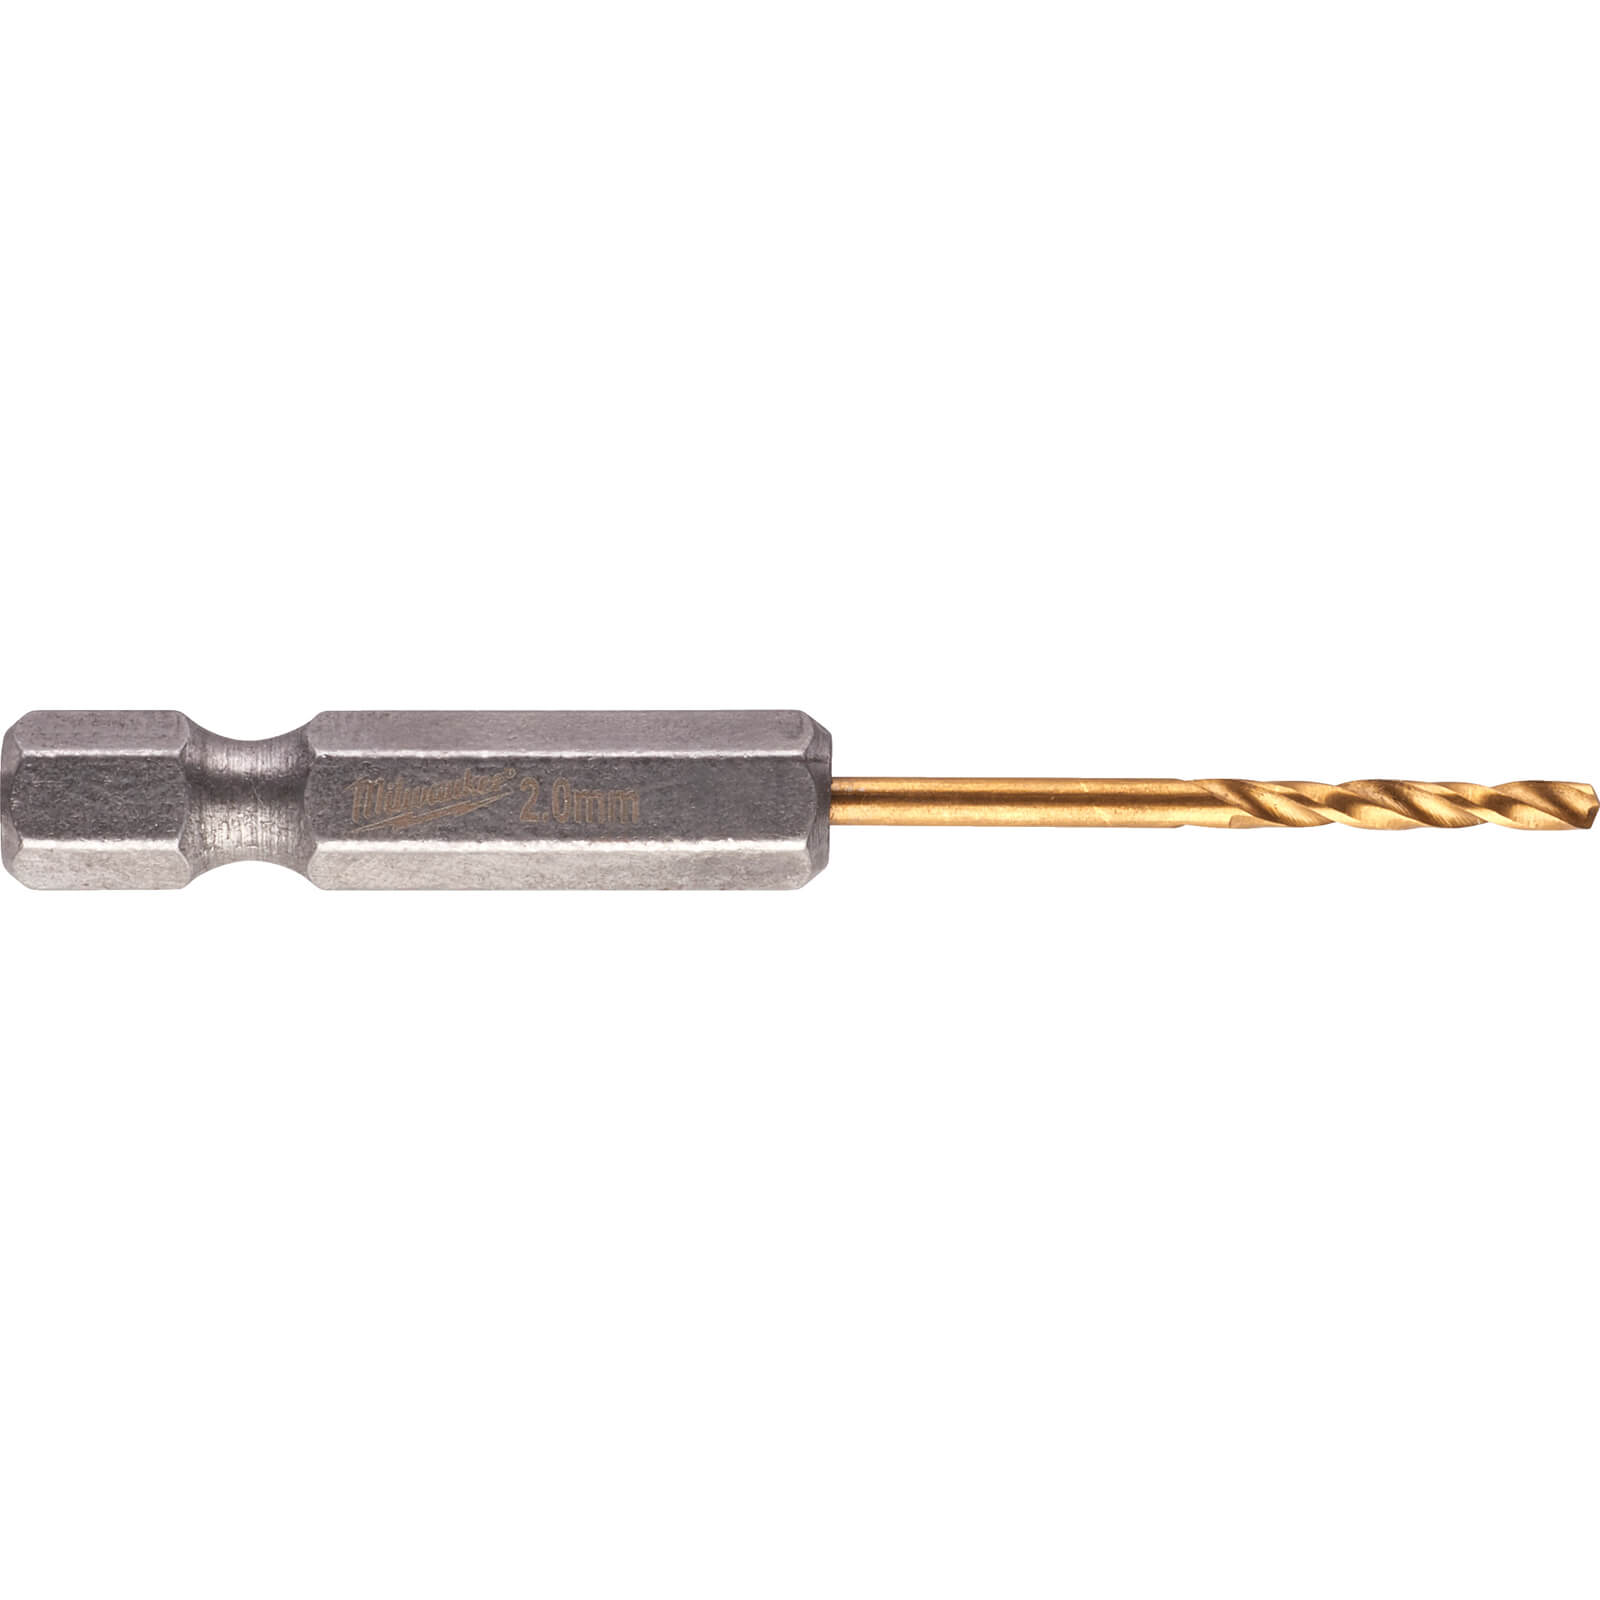 Image of Milwaukee HSS-G Shockwave Drill Bit 2mm Pack of 2